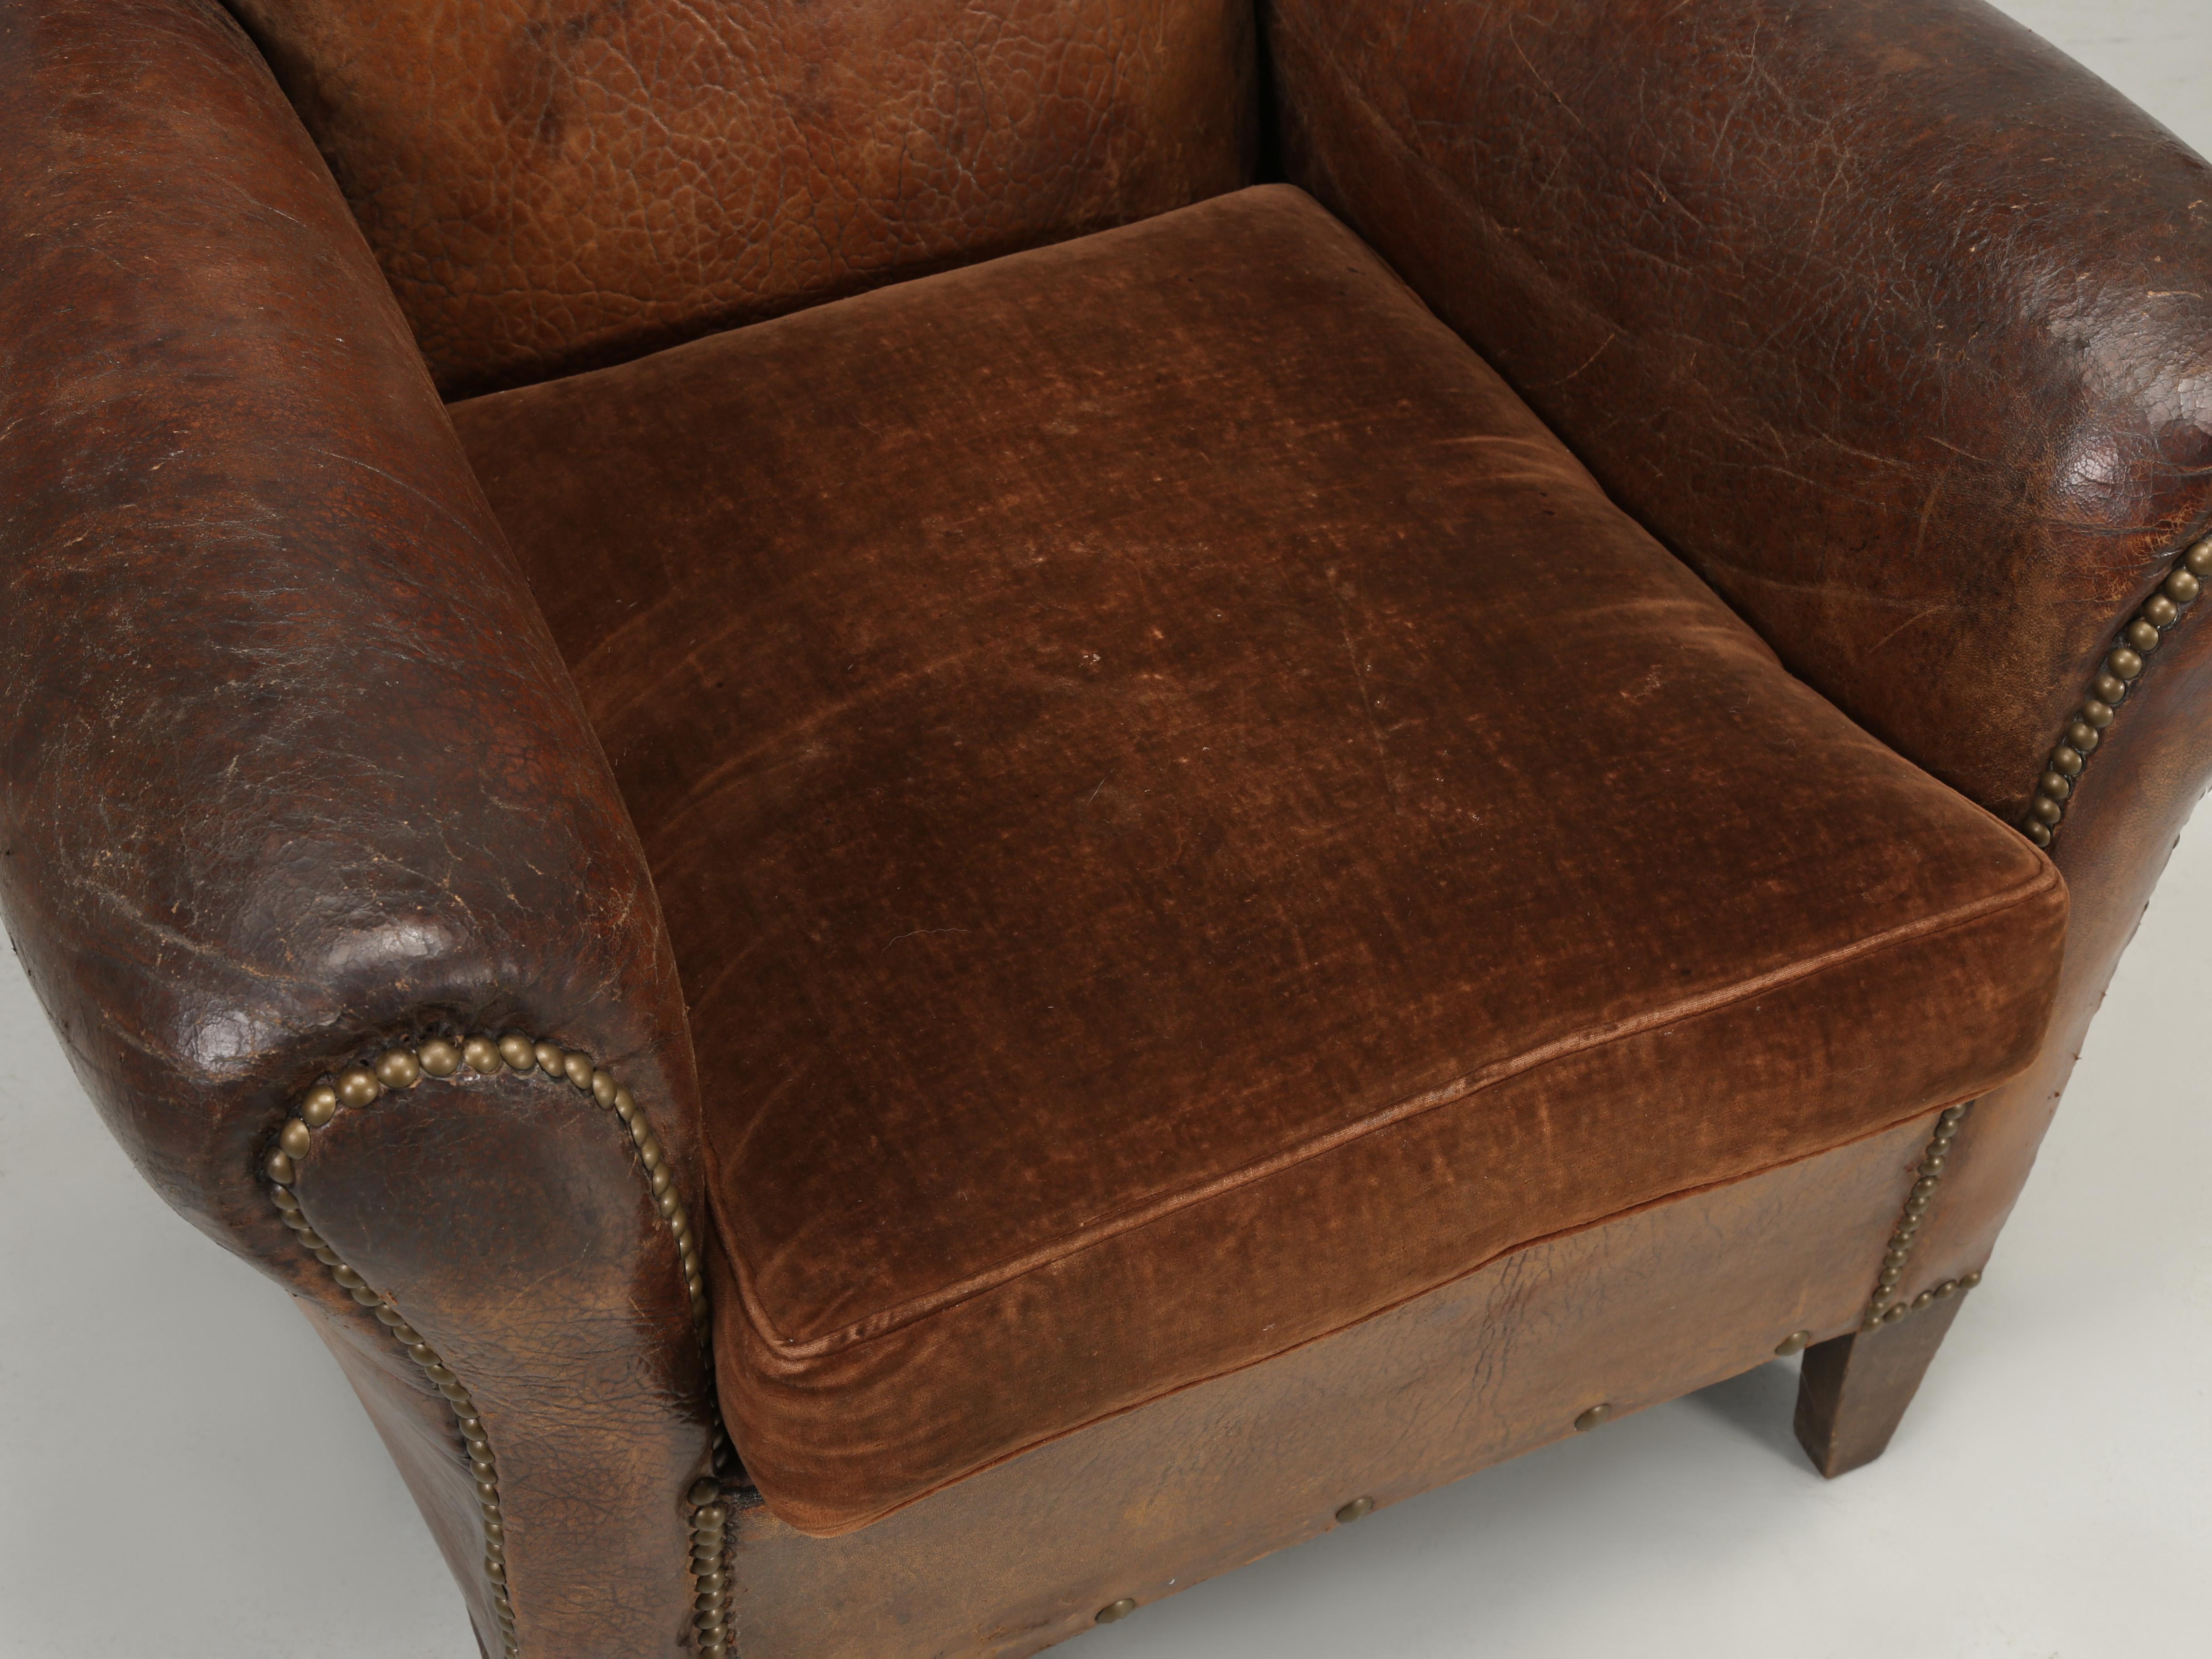 Early 20th Century French Club Chairs in Original Leather and Restored Internally with Horsehair